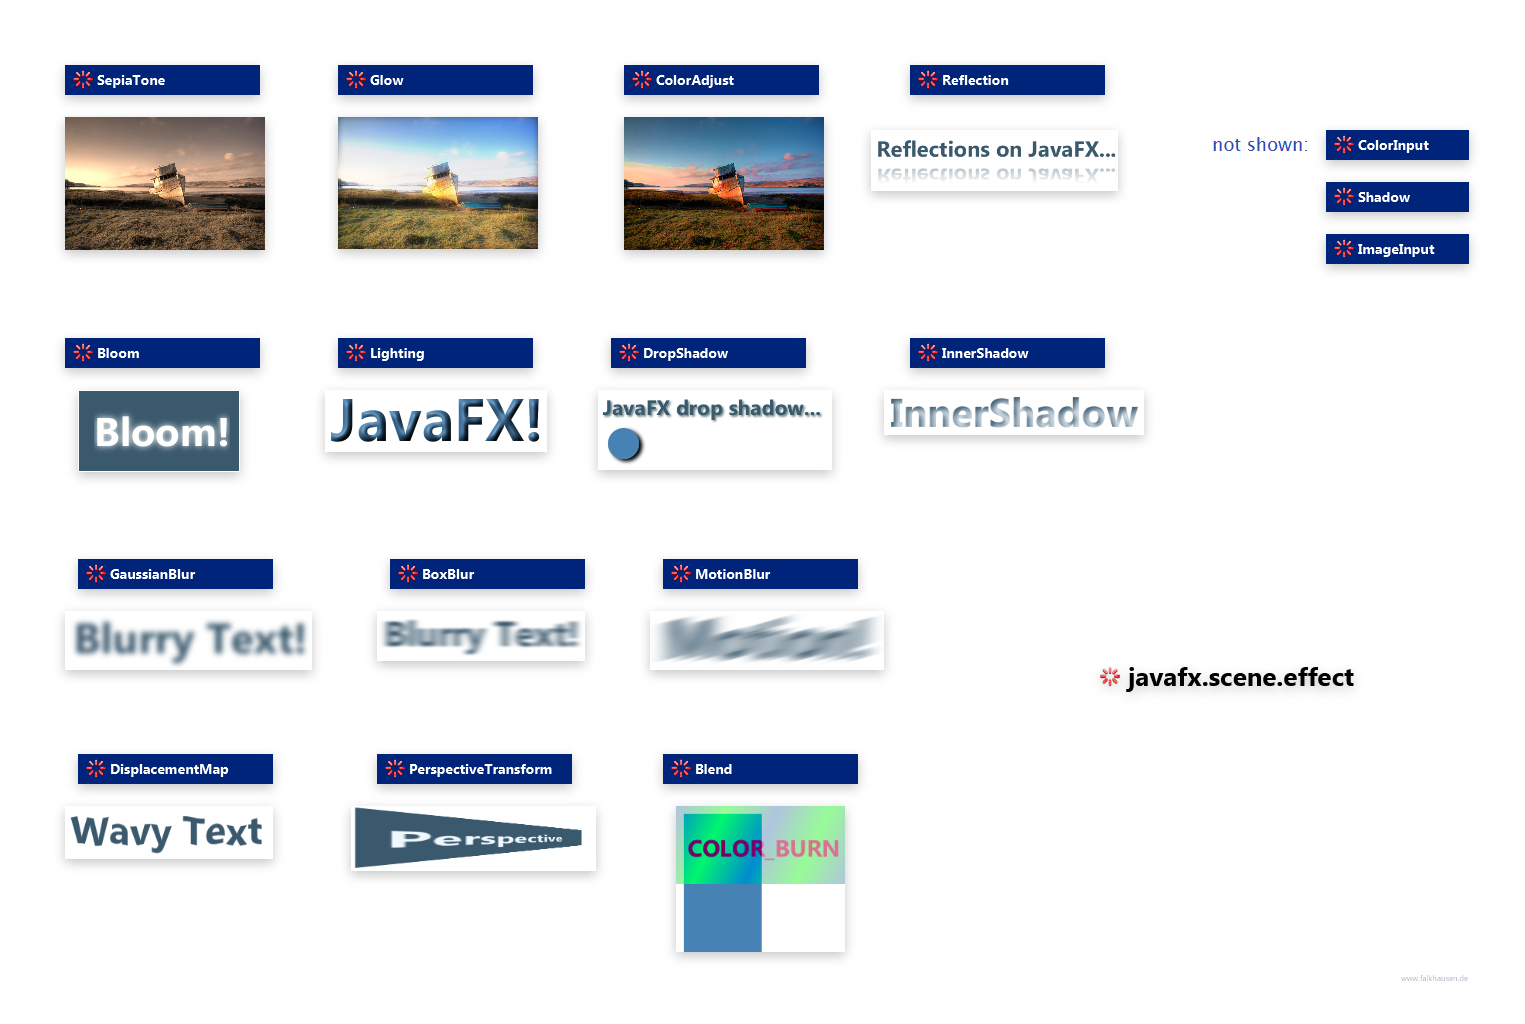 javafx.scene.effect Effect examples class diagram and api documentation for JavaFX 8